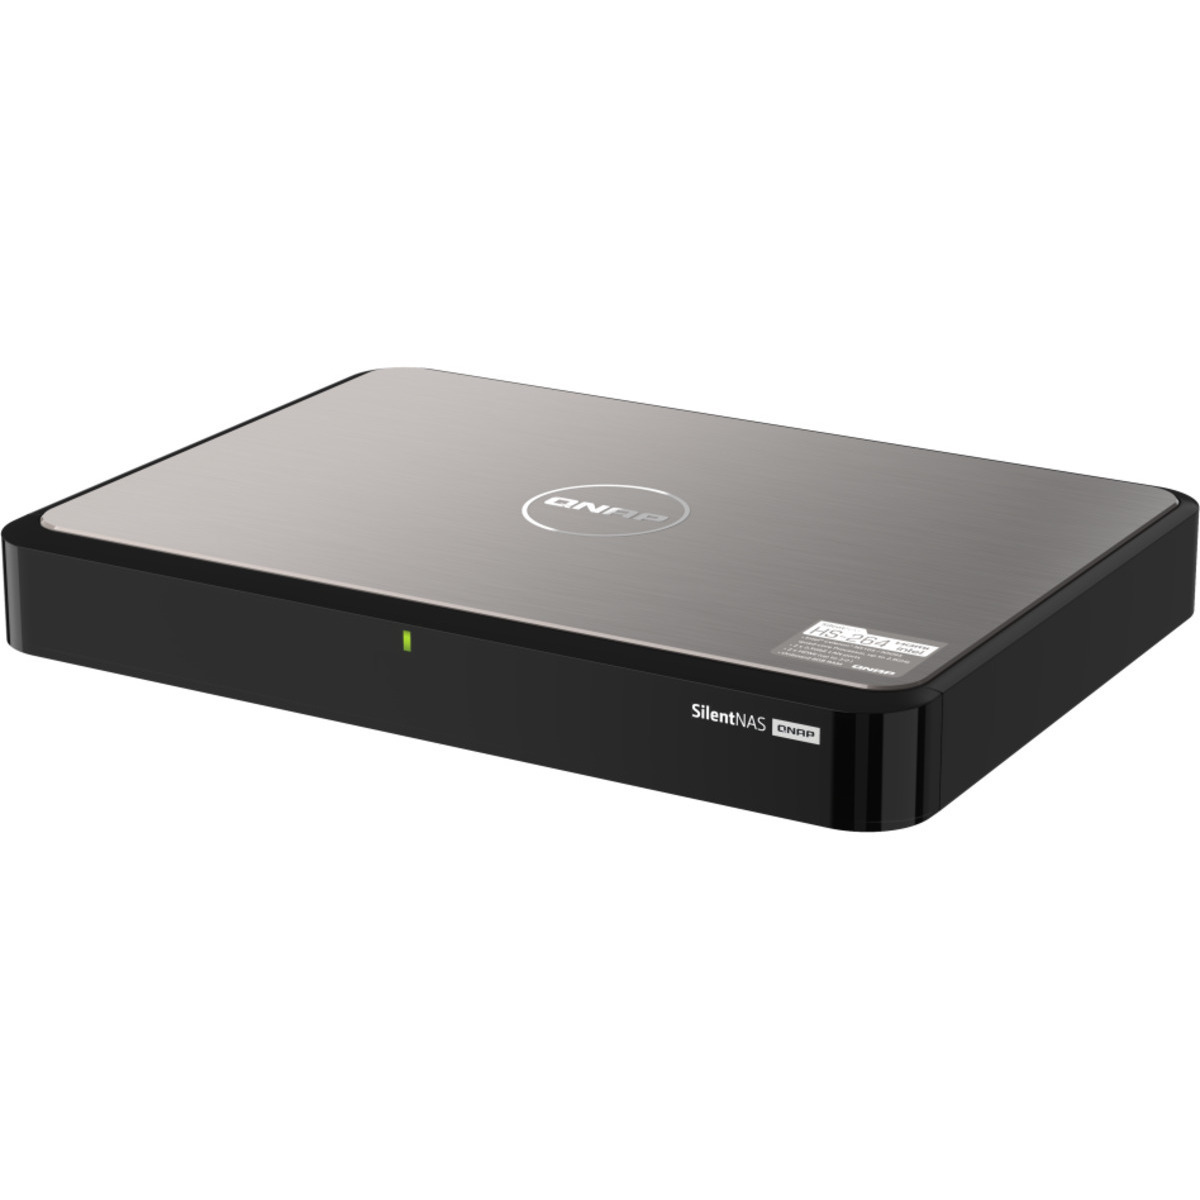 QNAP HS-264 1tb 2-Bay Desktop Multimedia / Power User / Business NAS - Network Attached Storage Device 2x500gb Western Digital Red SA500 WDS500G1R0A 2.5 560/530MB/s SATA 6Gb/s SSD NAS Class Drives Installed - Burn-In Tested HS-264